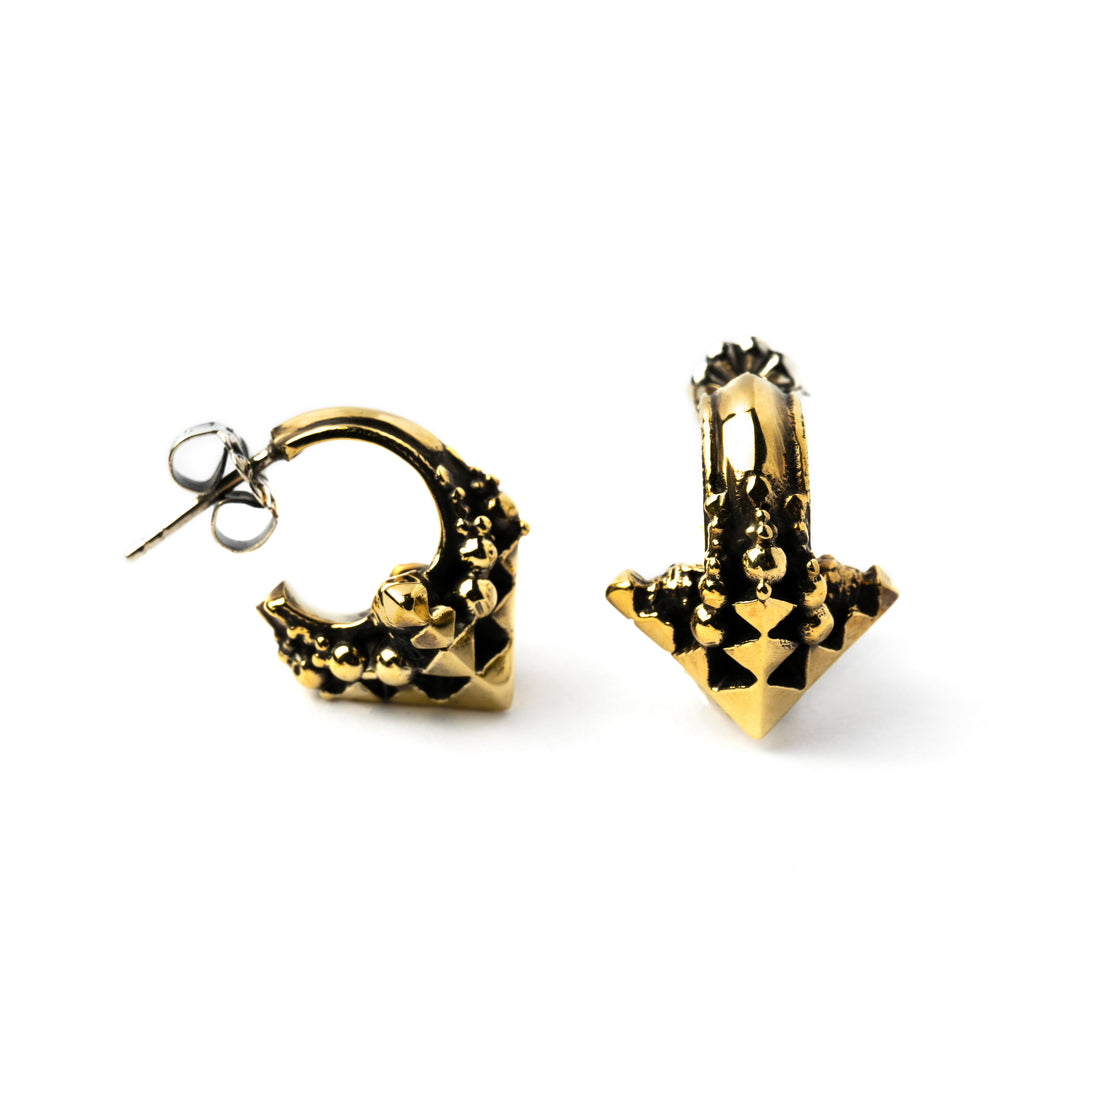 Karnataka brass earrings front and side view